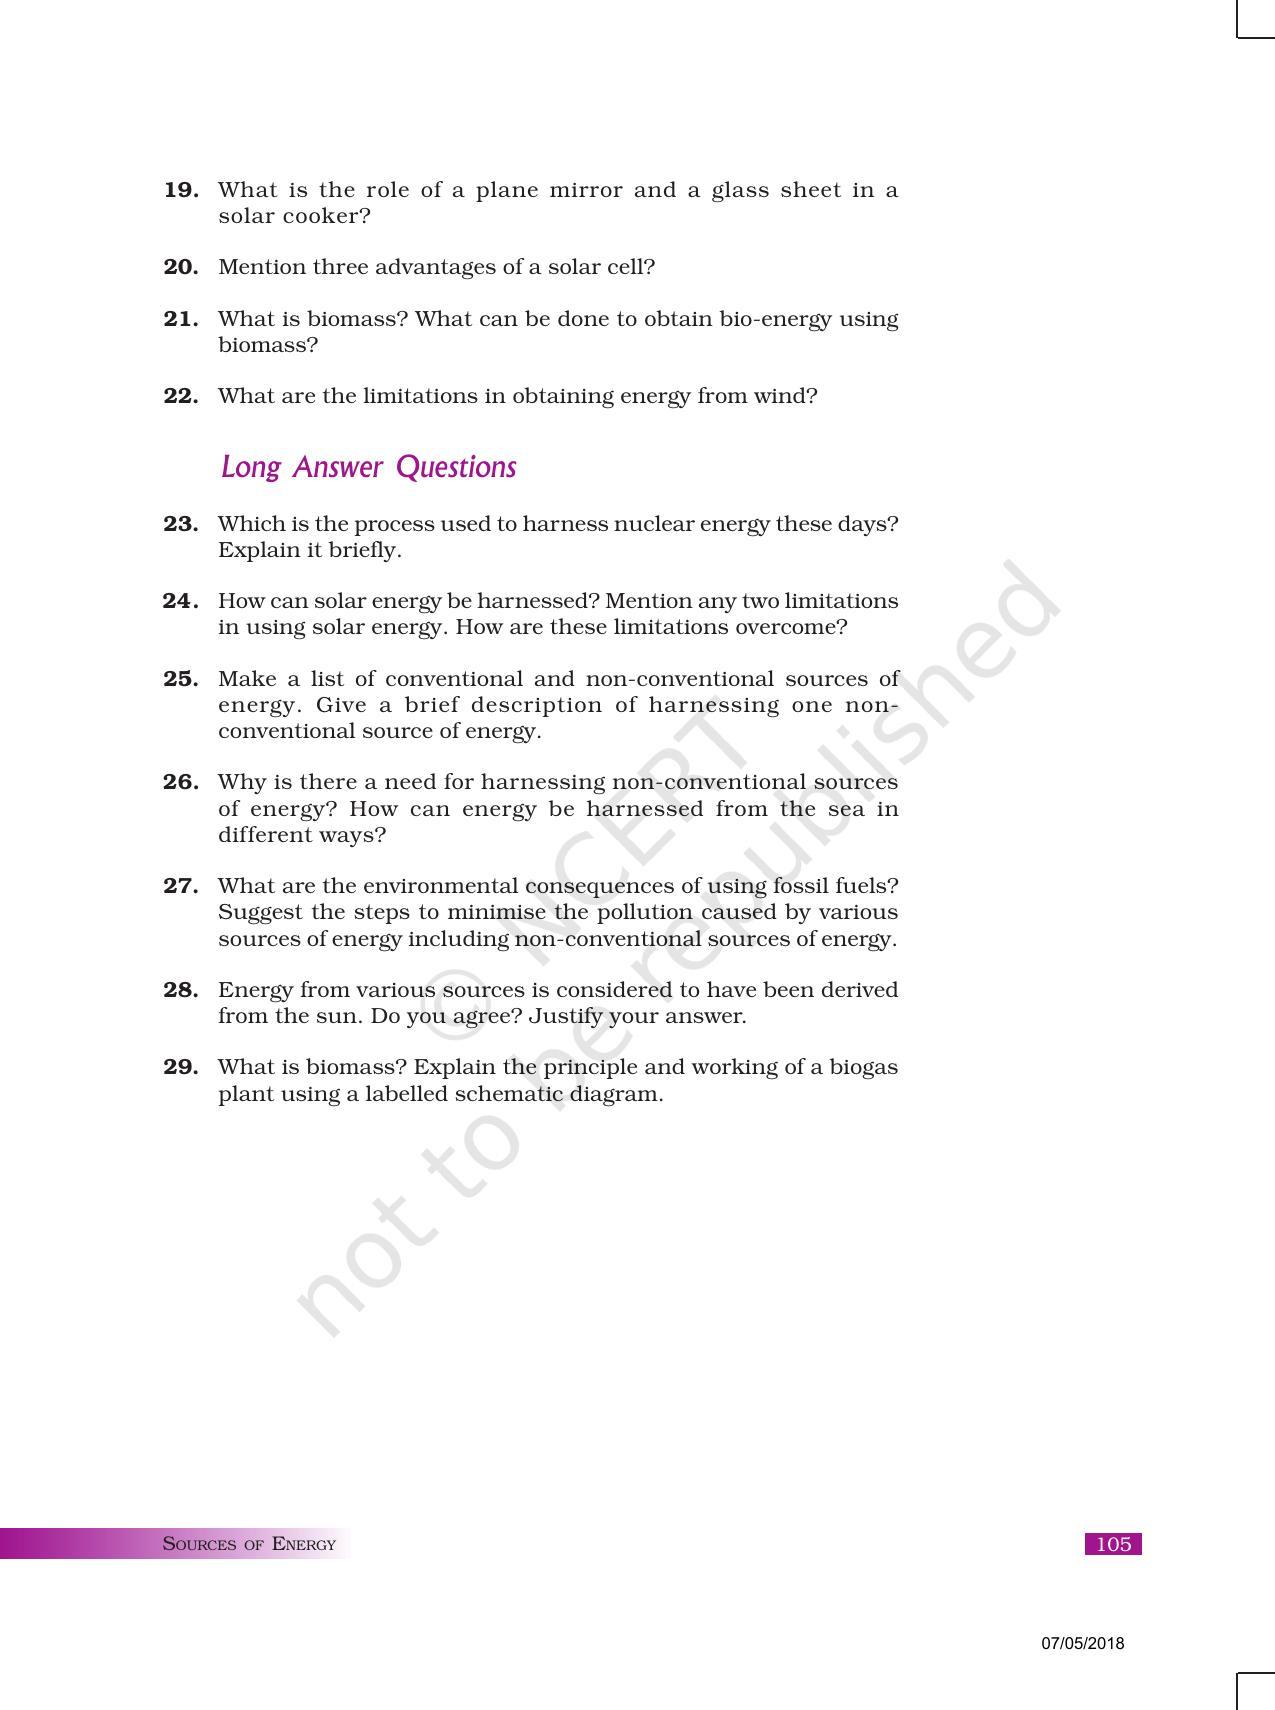 NCERT Exemplar Book for Class 10 Science: Chapter 14 Sources of Energy - Page 4